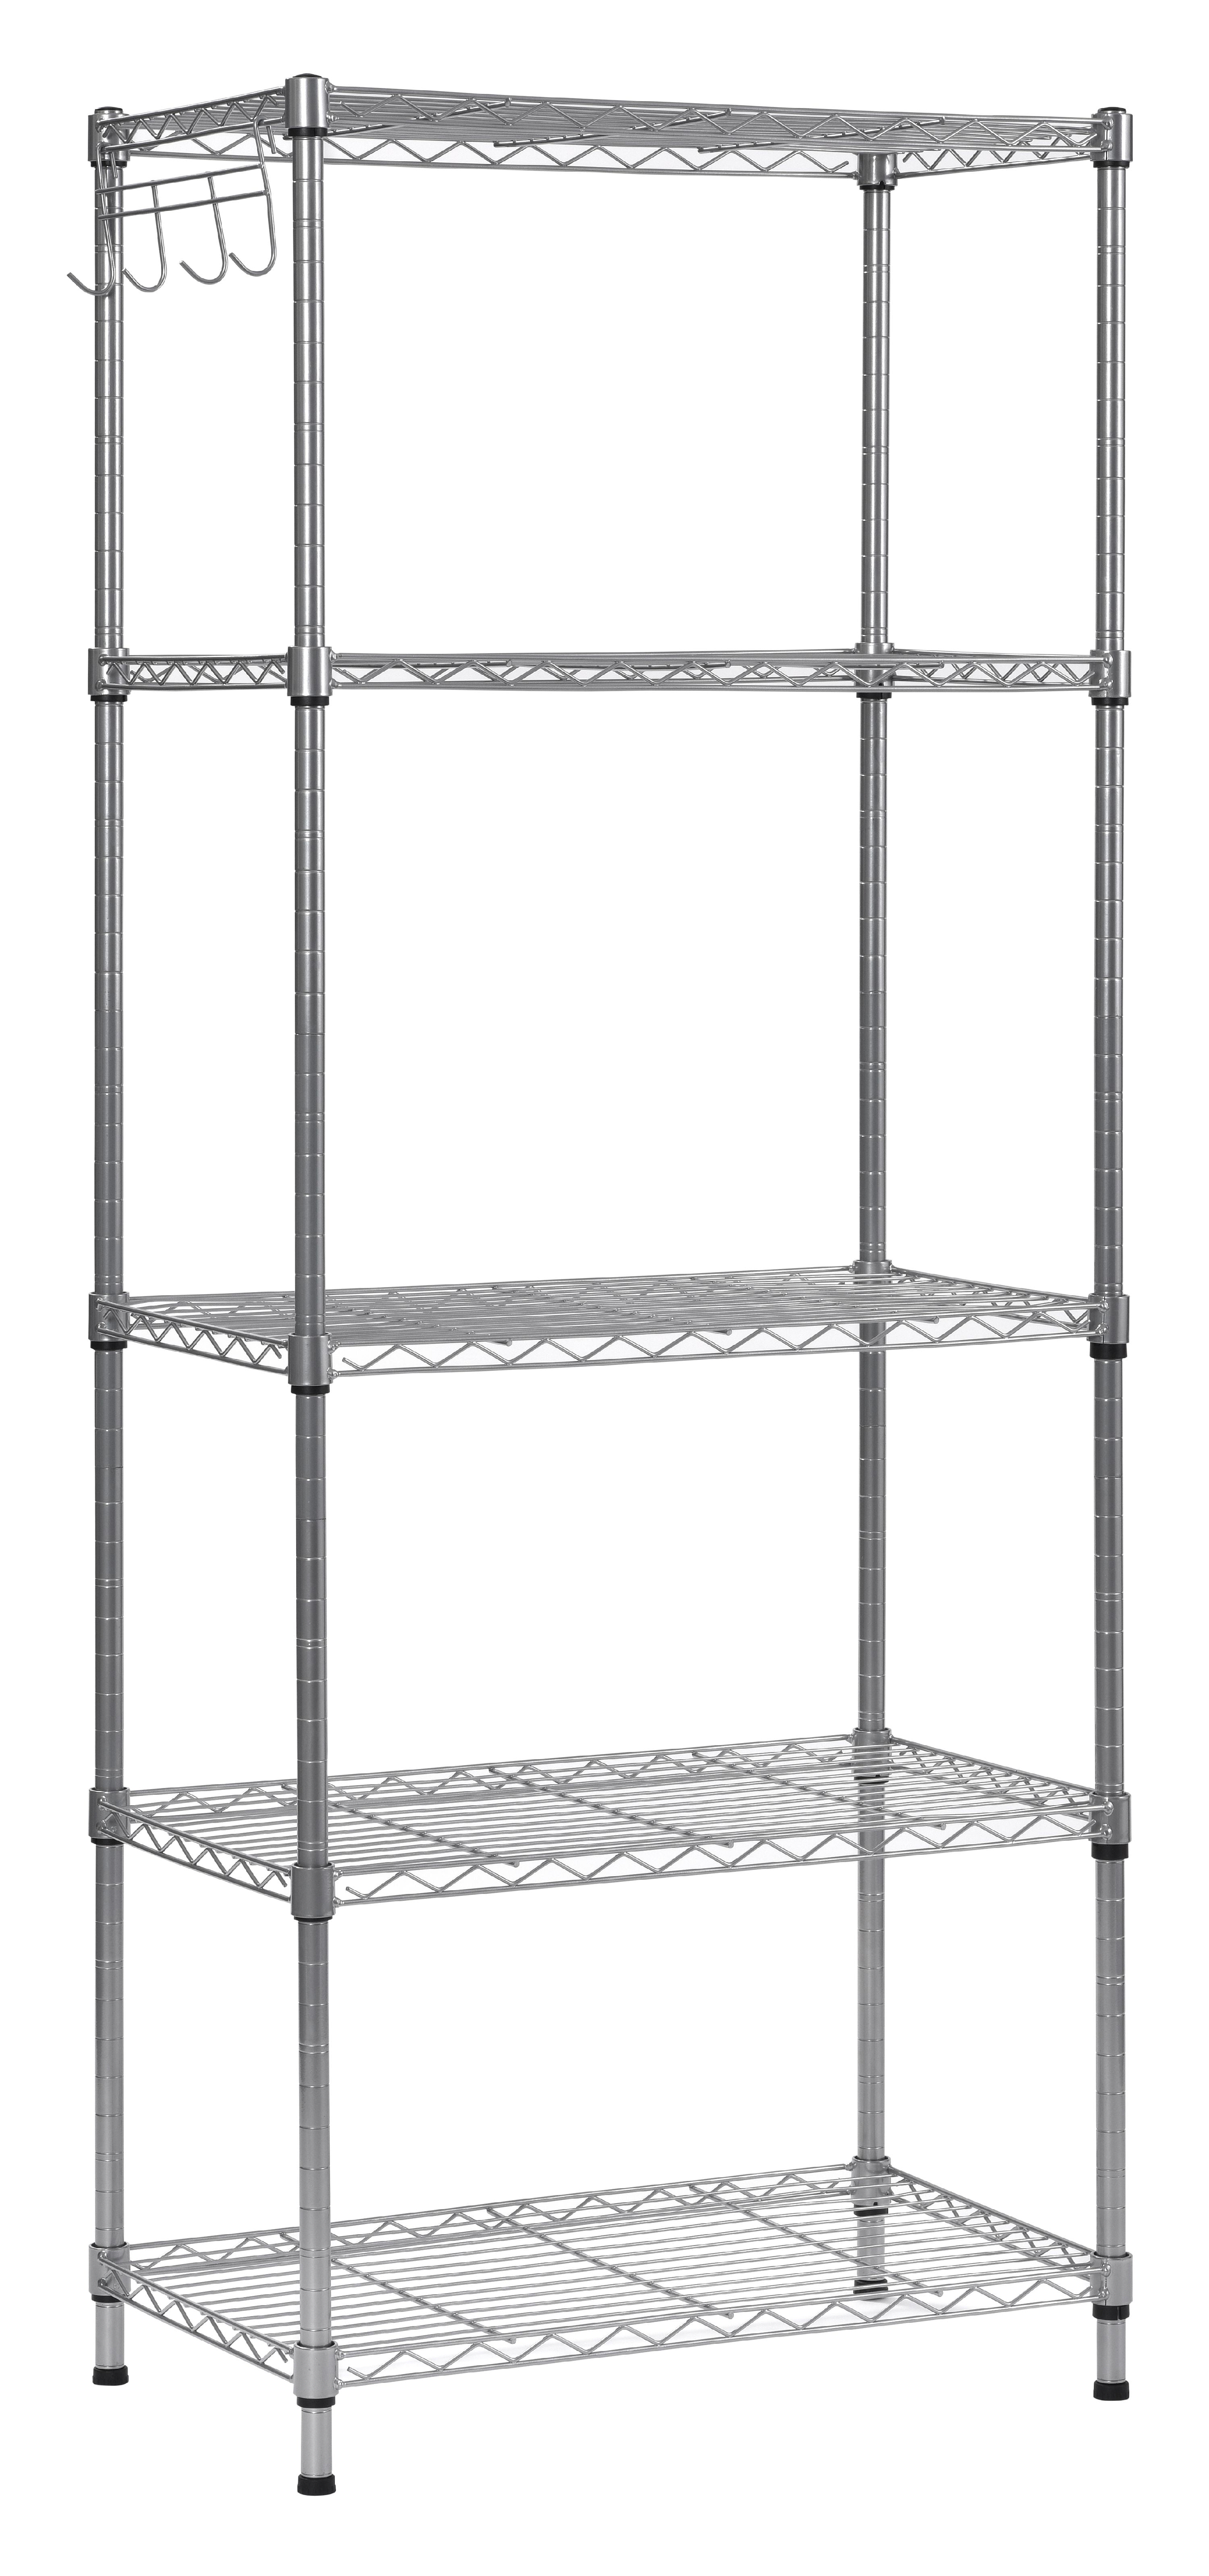 Muscle Rack 5 Tier Wire Shelving Unit, 5 Tier Wire Shelving With Wheels